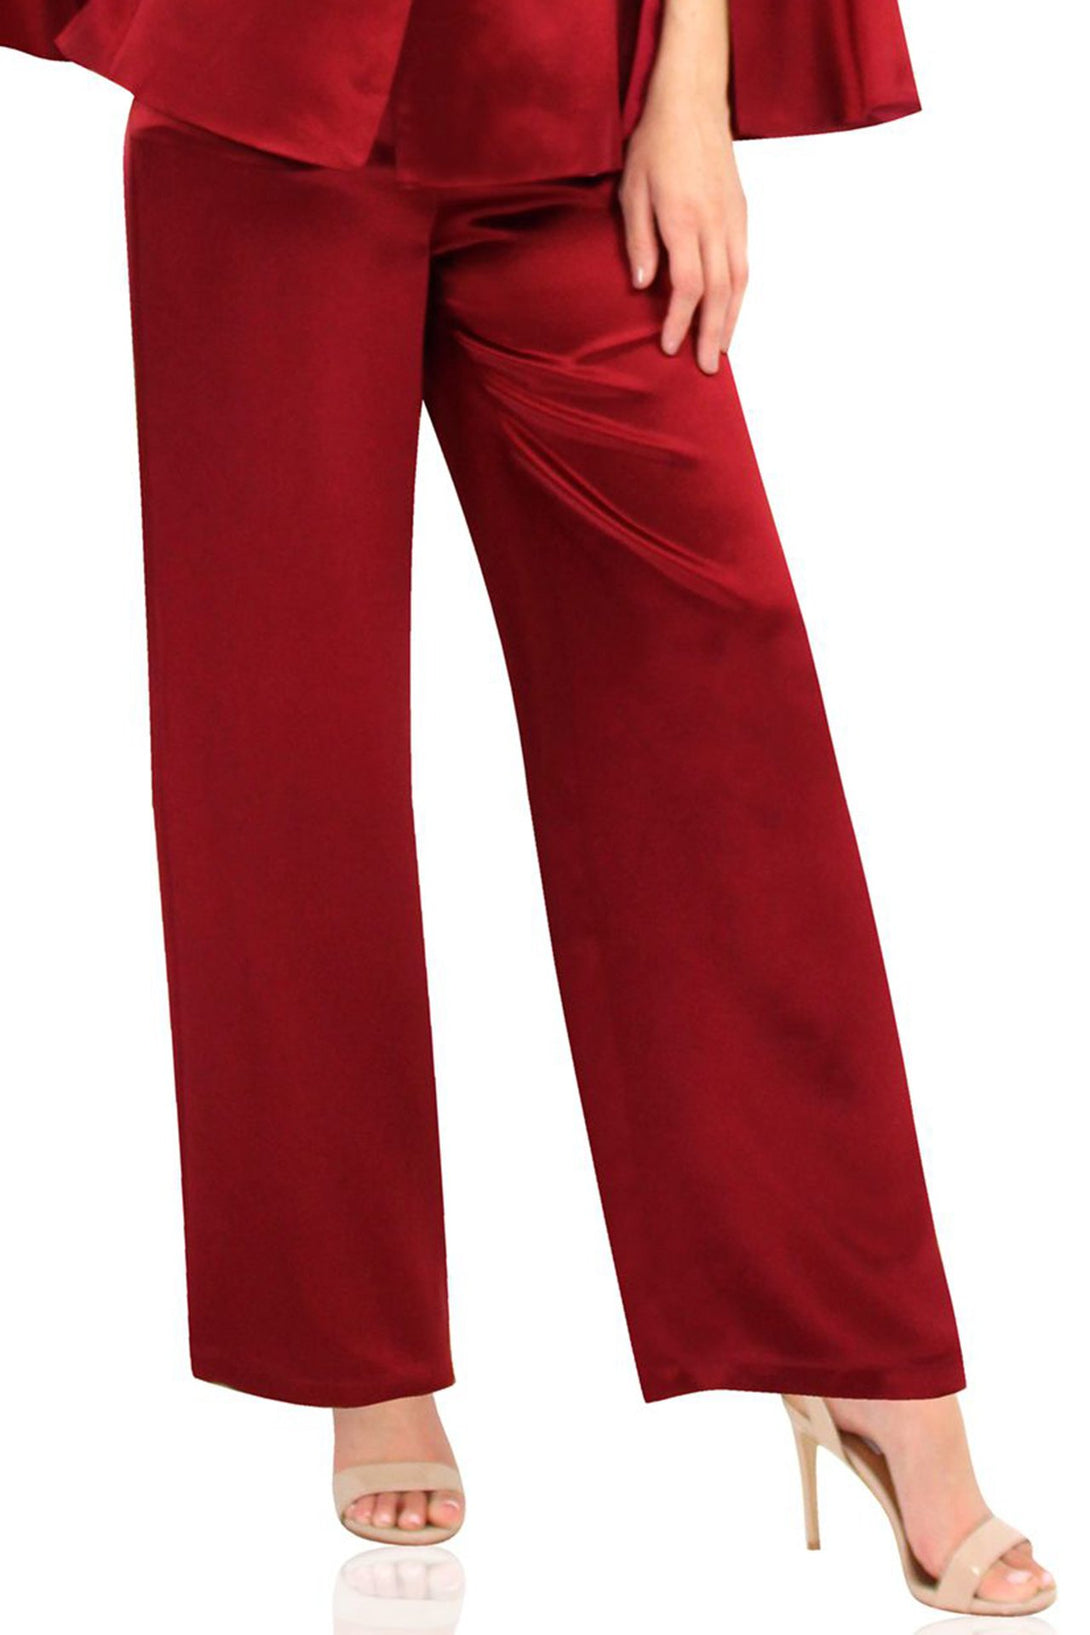 Designer-Straight-Fit-Womens-Pants-In-Red-By-Kyle-Richard